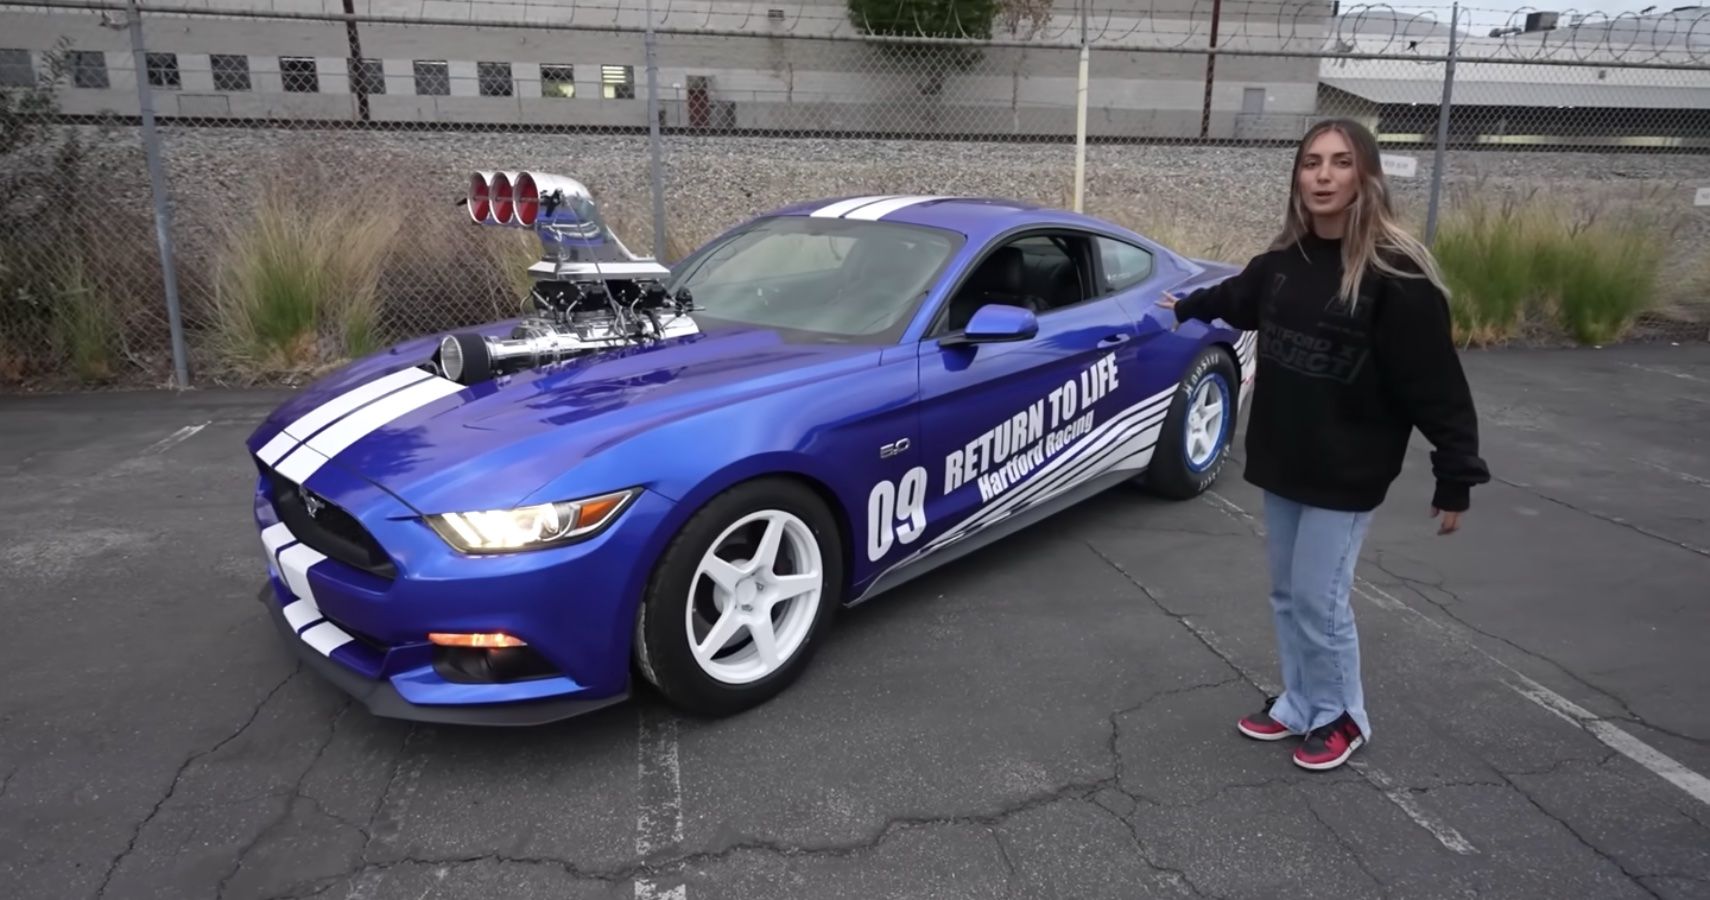 Emelia Hartford's 9.8-liter Ford Mustang Is Back And Better Than Ever